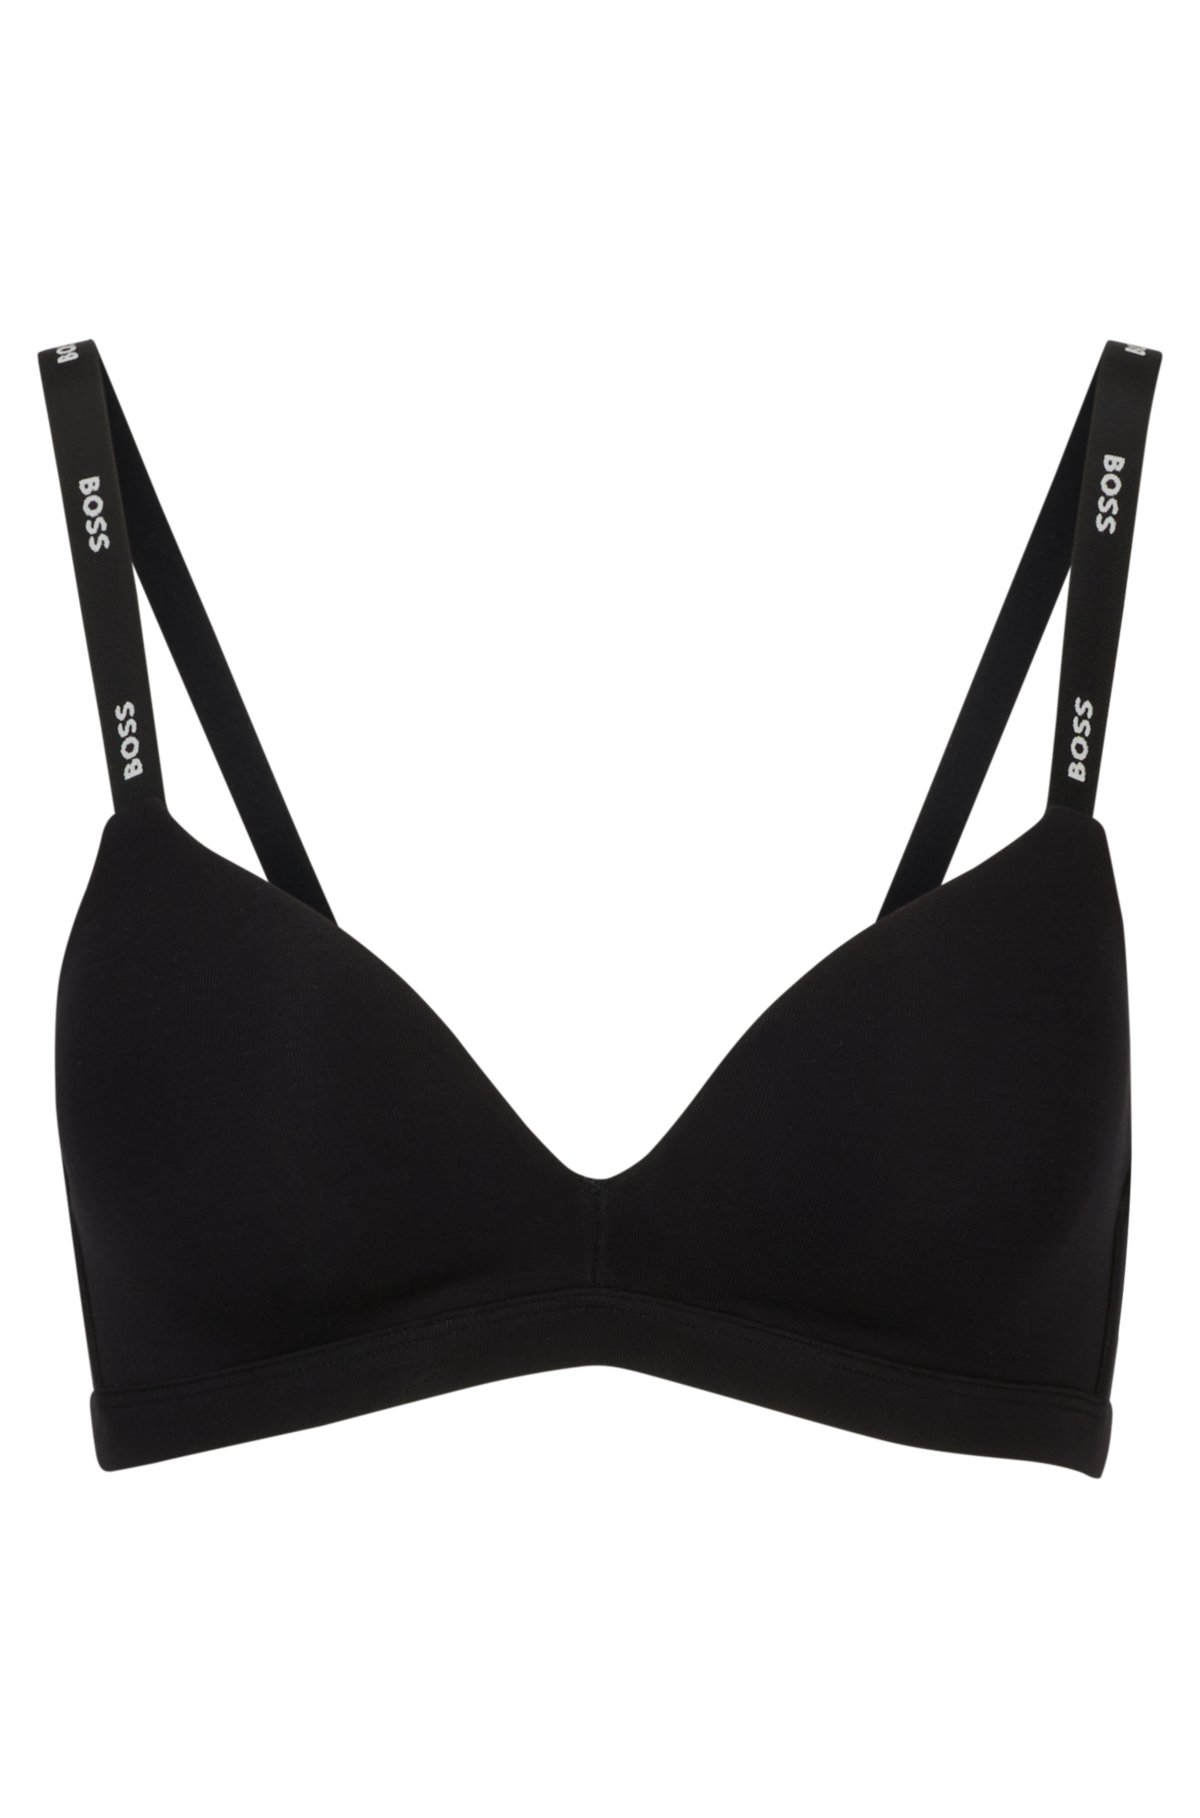 BOSS - Padded triangle bra with detachable branded straps